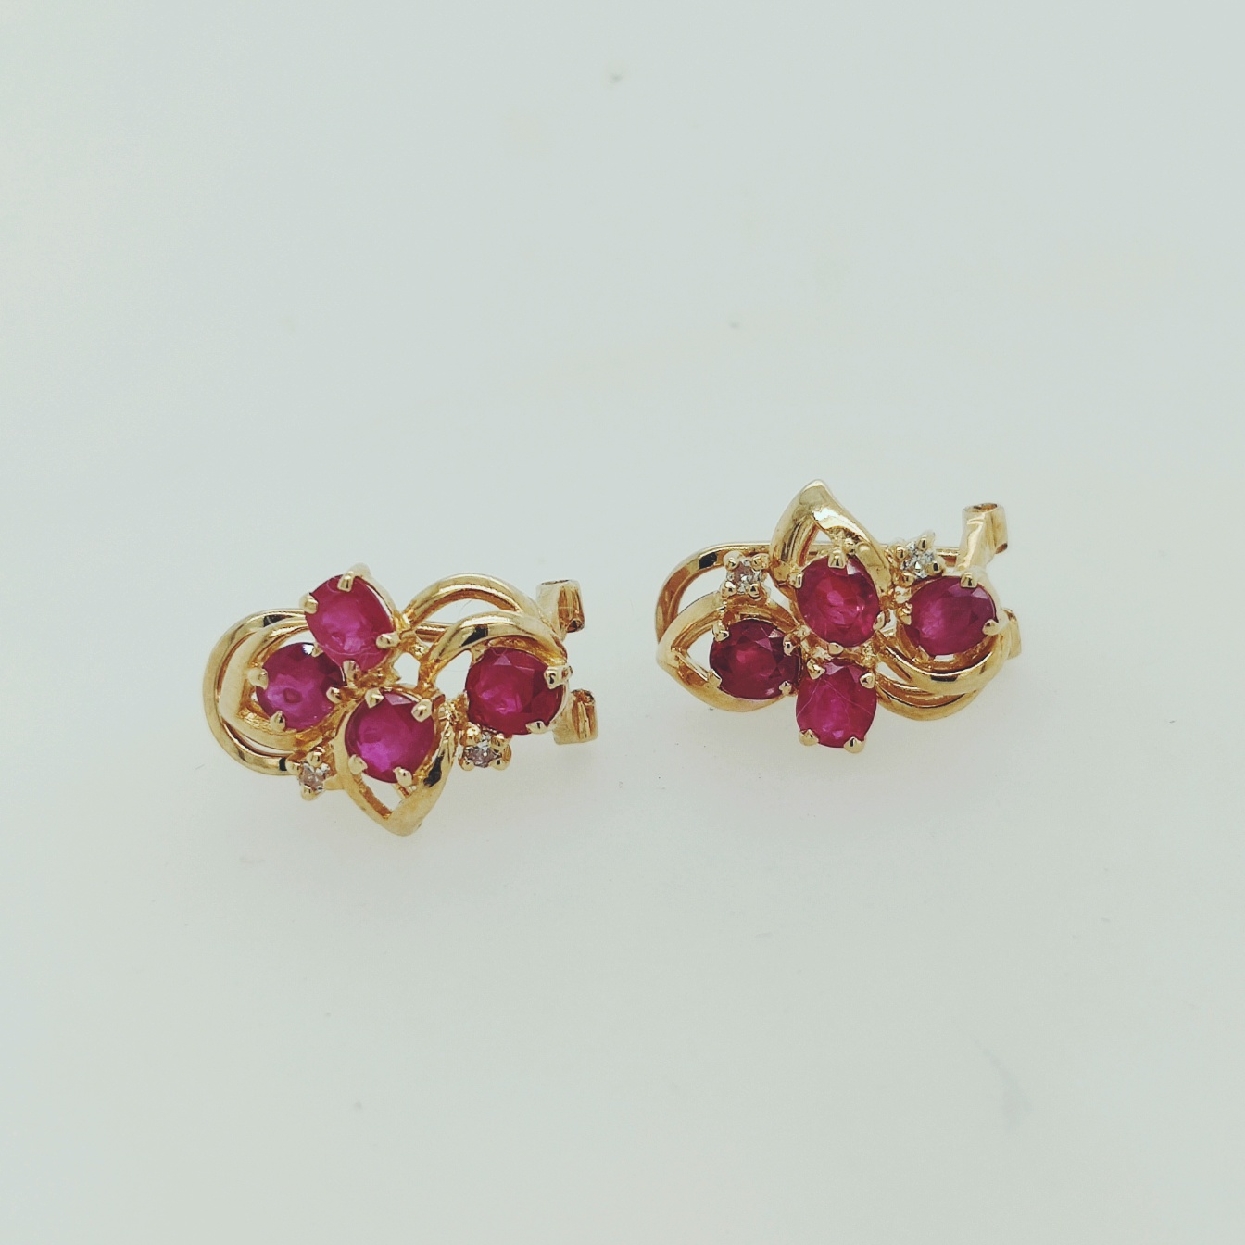 14K Yellow Gold and Ruby Cluster Earrings with Omega Backs